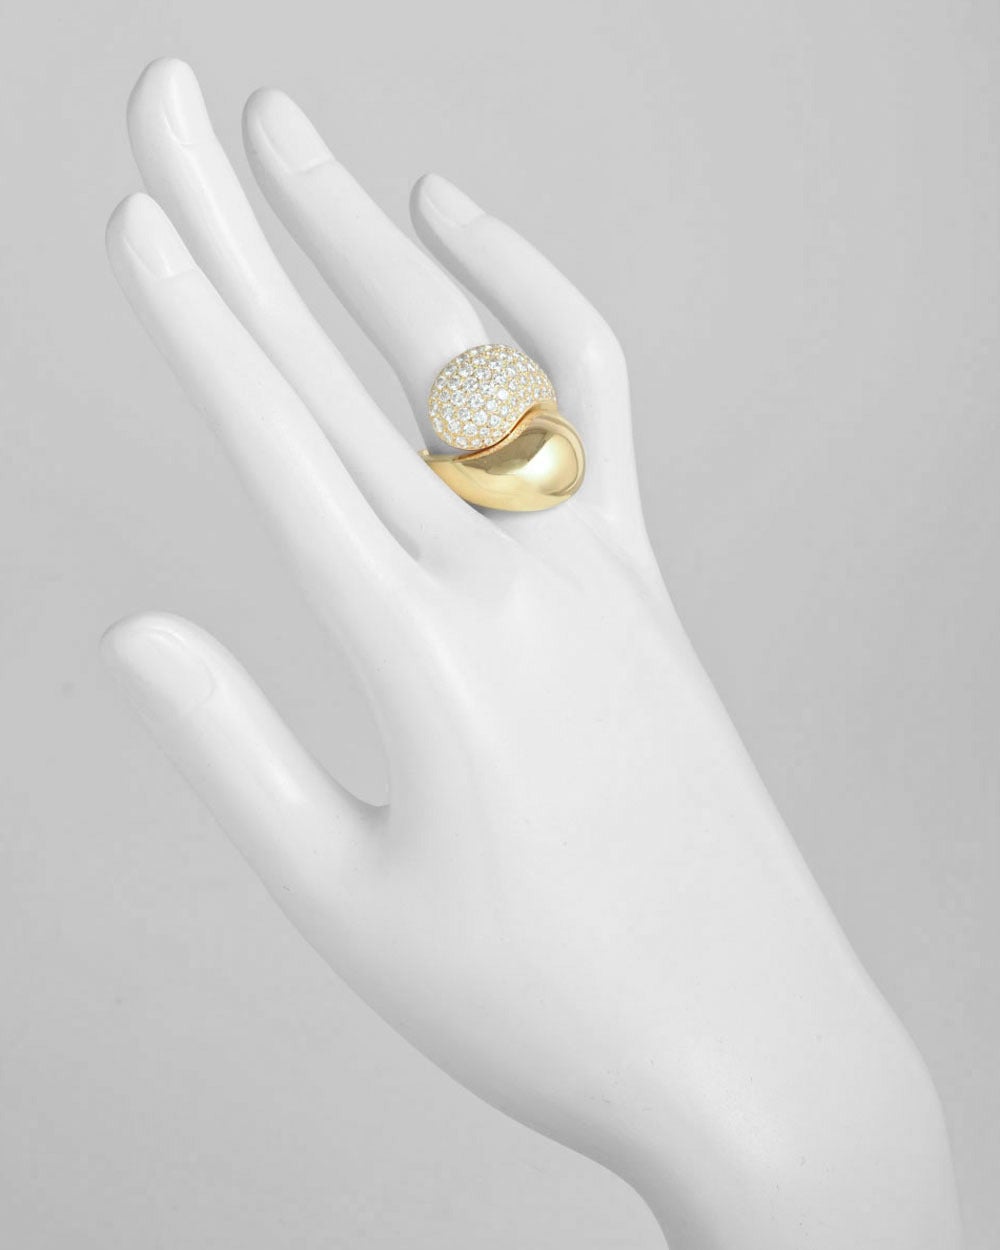 Bypass ring in polished 18k yellow gold with pavé diamonds, the diamonds weighing approximately 2.64 total carats, numbered 817856, signed Cartier. Size 7.5 (56 - European).